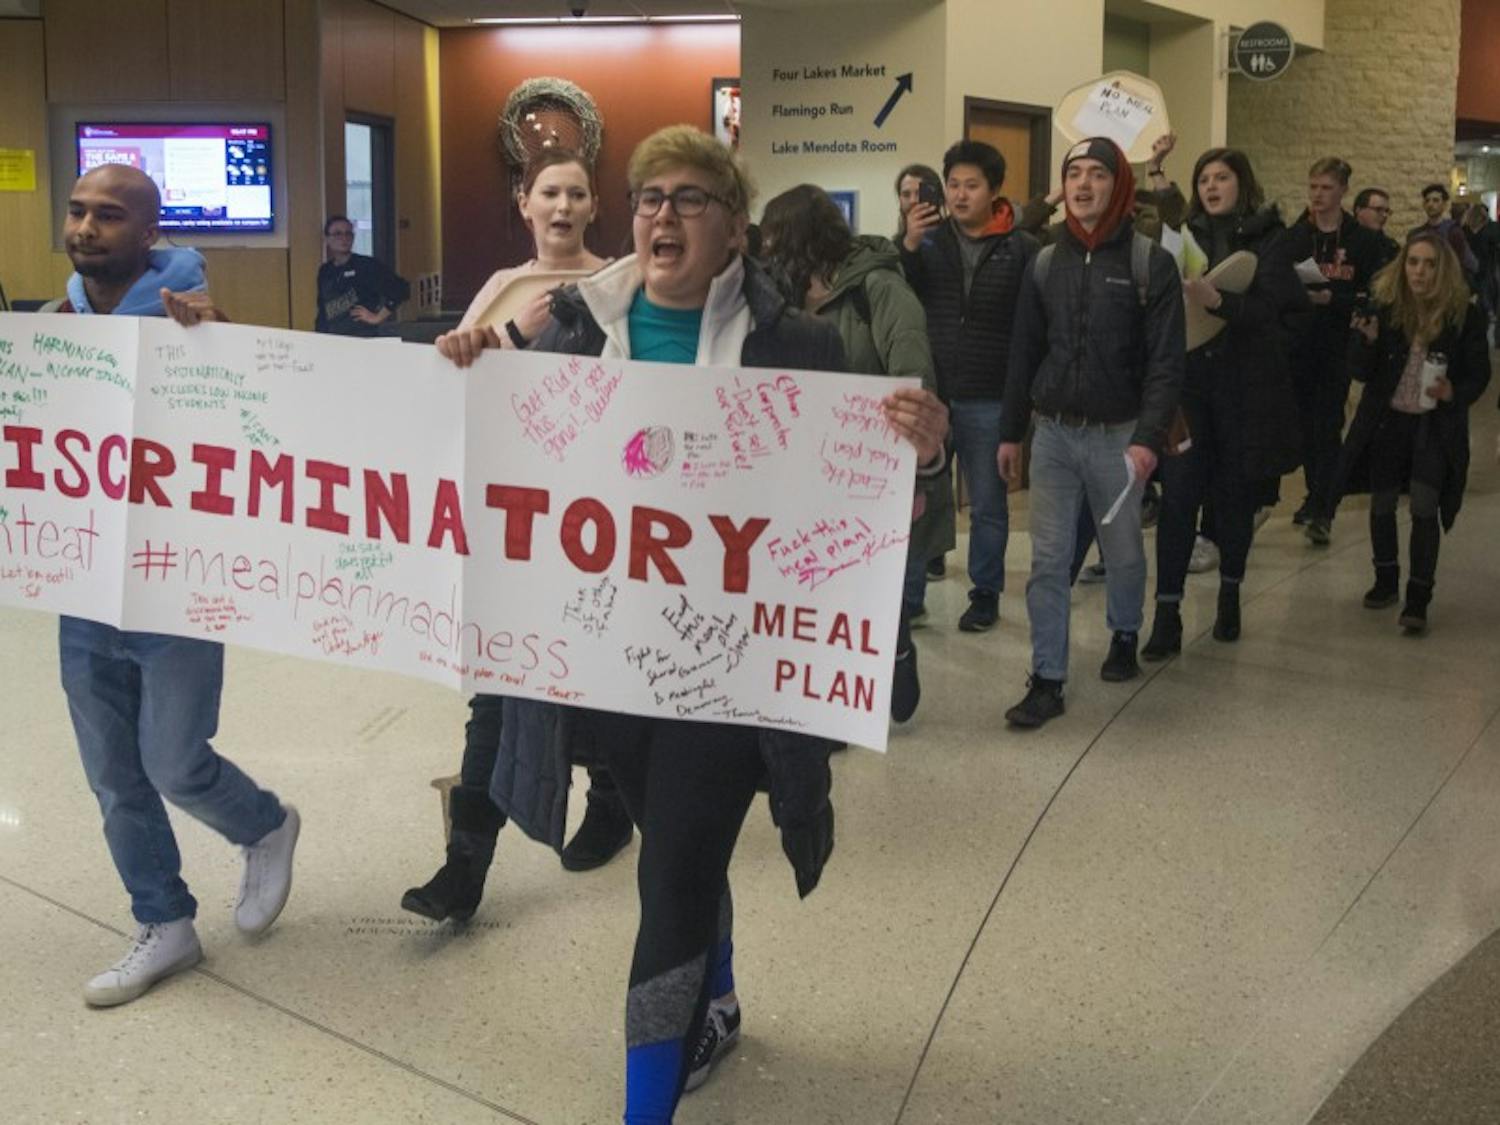 Students marched through Four Lakes Market Tuesday to voice their opposition against UW-Madison's meal plan for incoming freshmen.&nbsp;